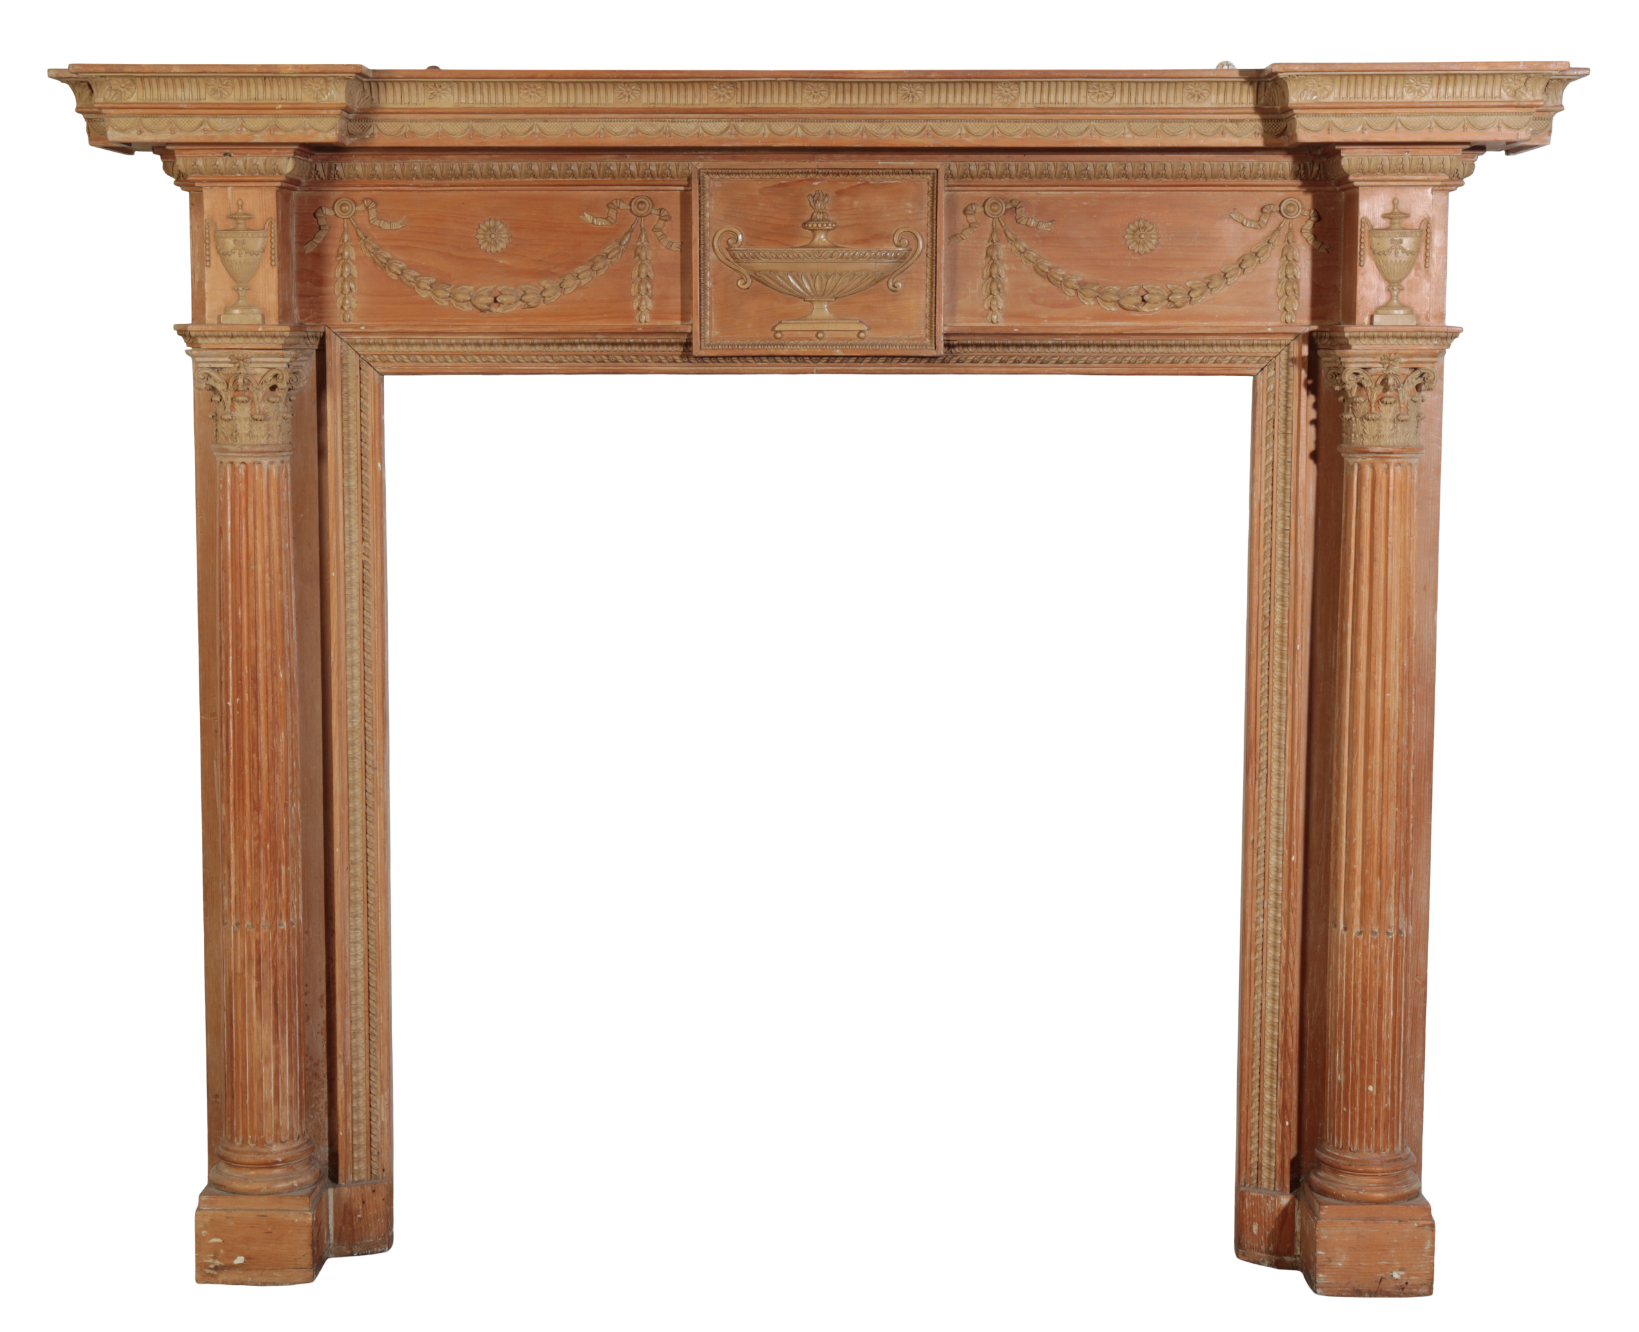 A GEORGE III PINE AND GESSO FIREPLACE 3adf76